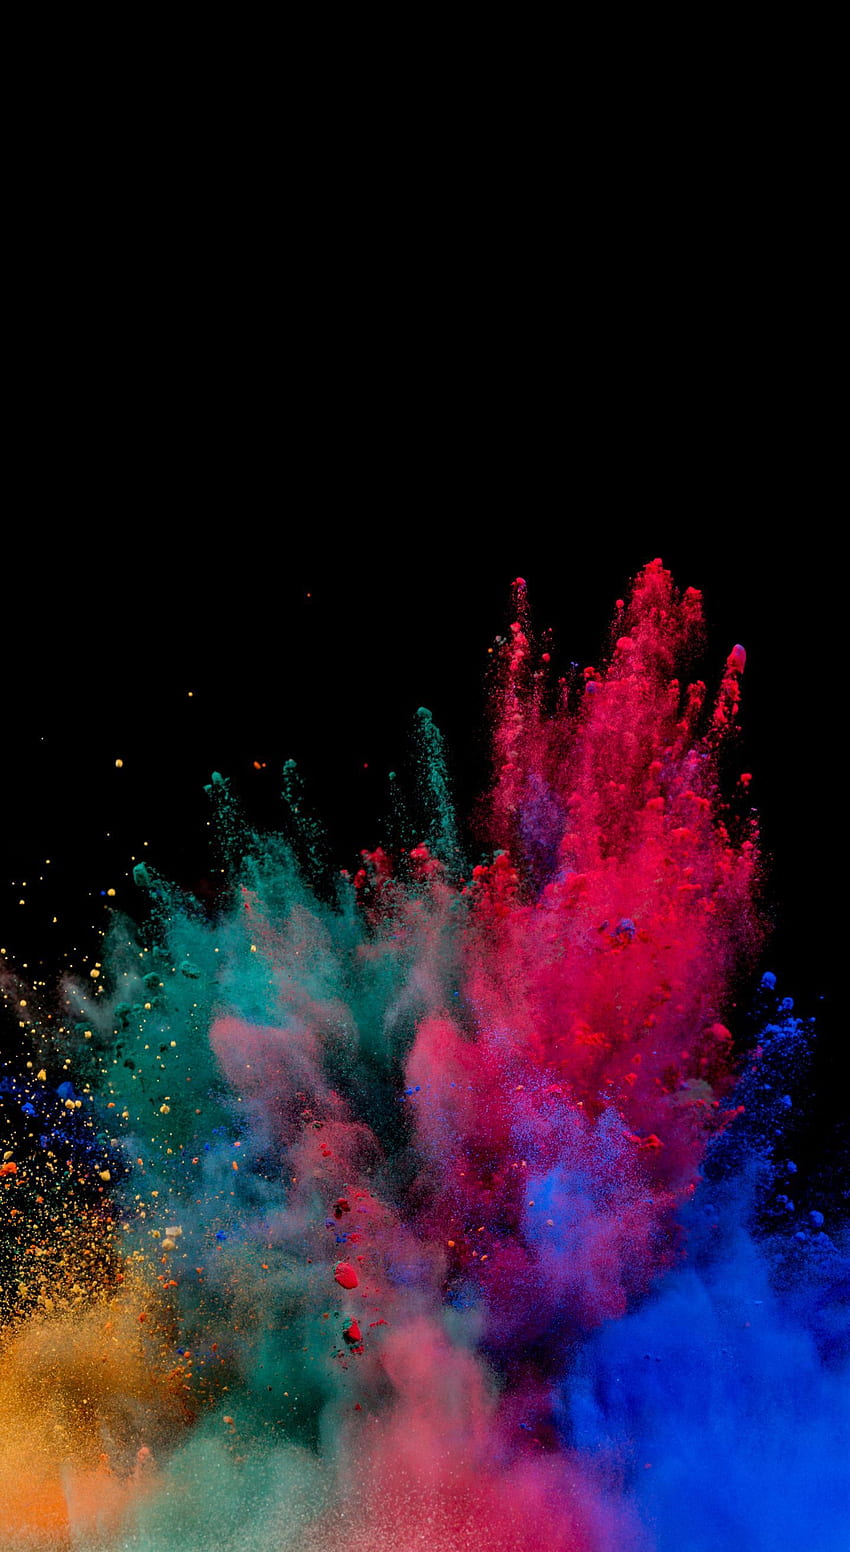 100+] Note 8 Wallpapers | Wallpapers.com